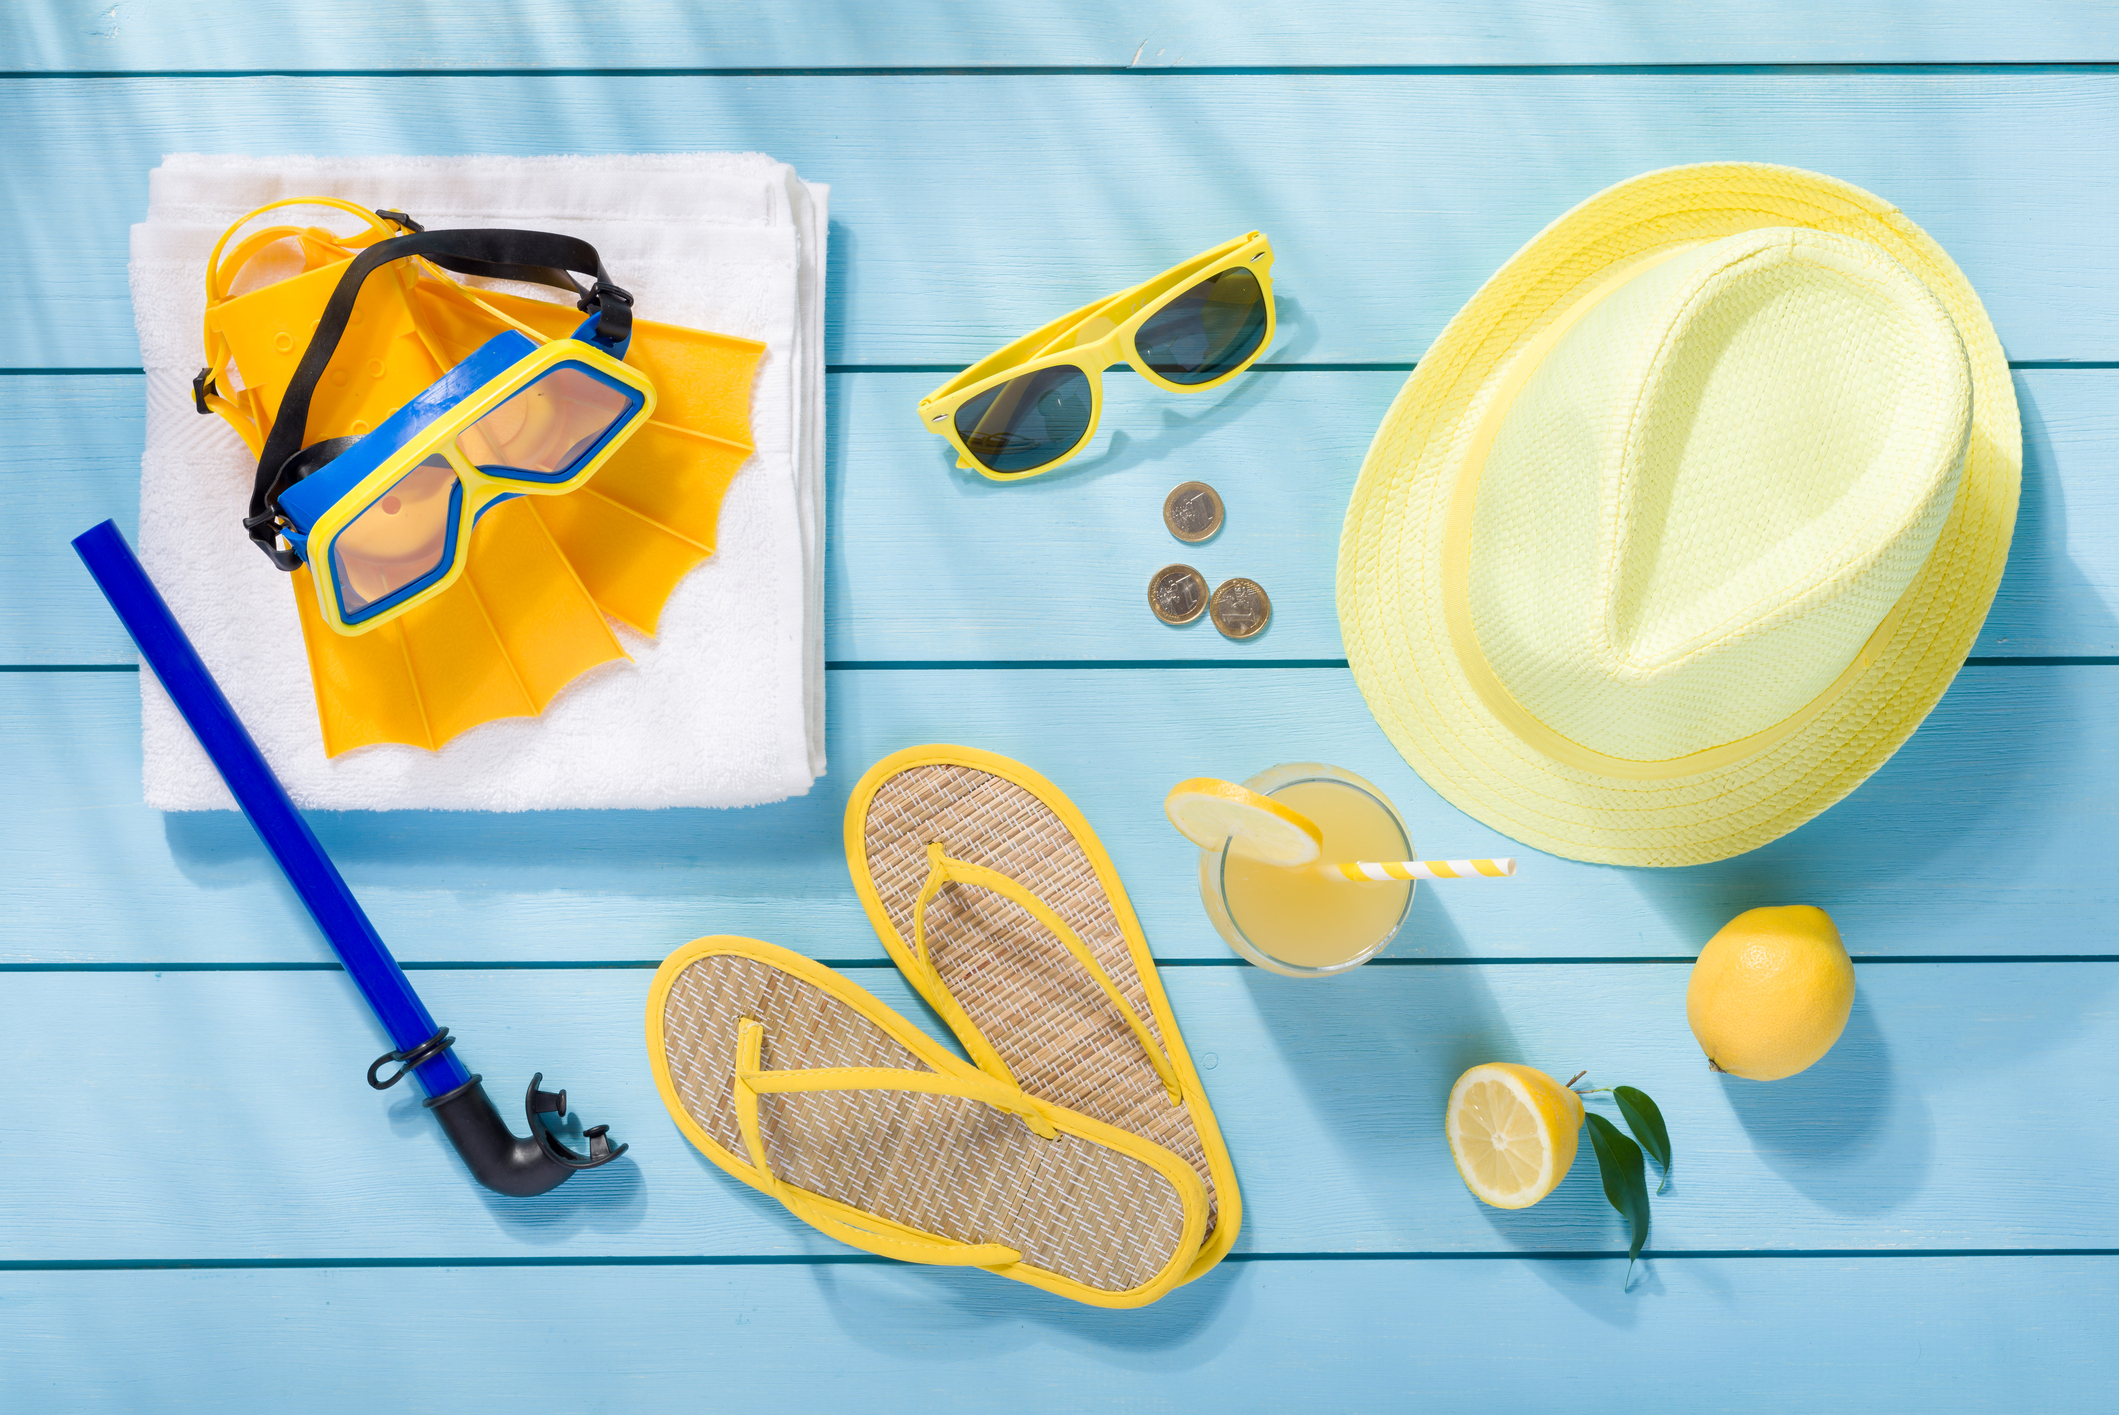 Summer accessories on blue wooden background top view